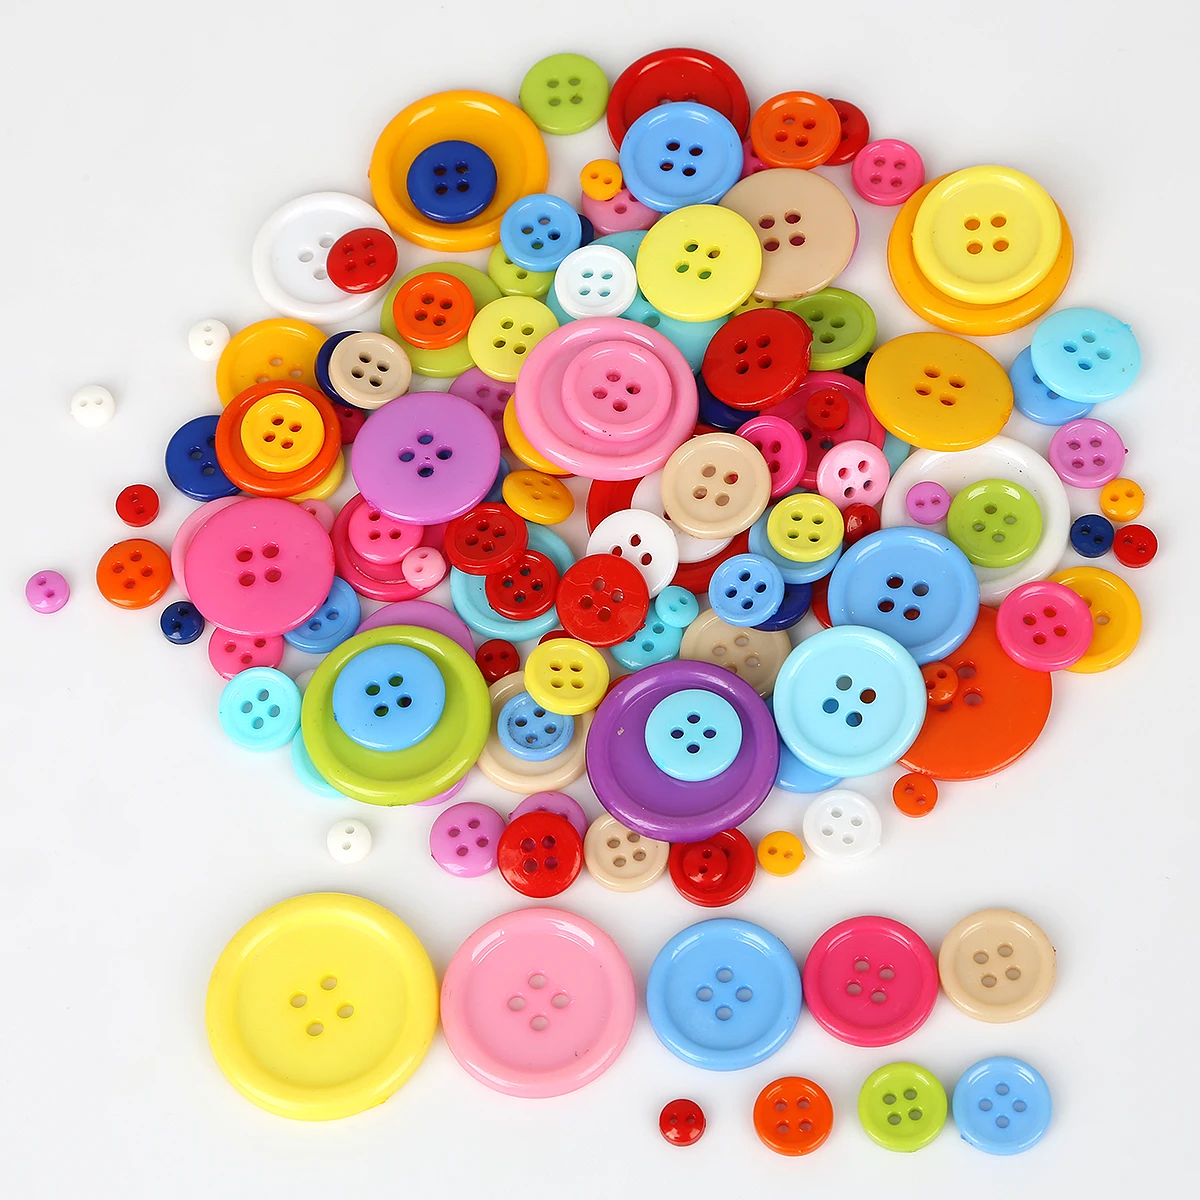 

20-200PCS Multi Sizes Round Resin Mini Tiny Buttons Sewing Tools Decorative Button Scrapbooking Garment DIY Apparel Accessories, Mixed color